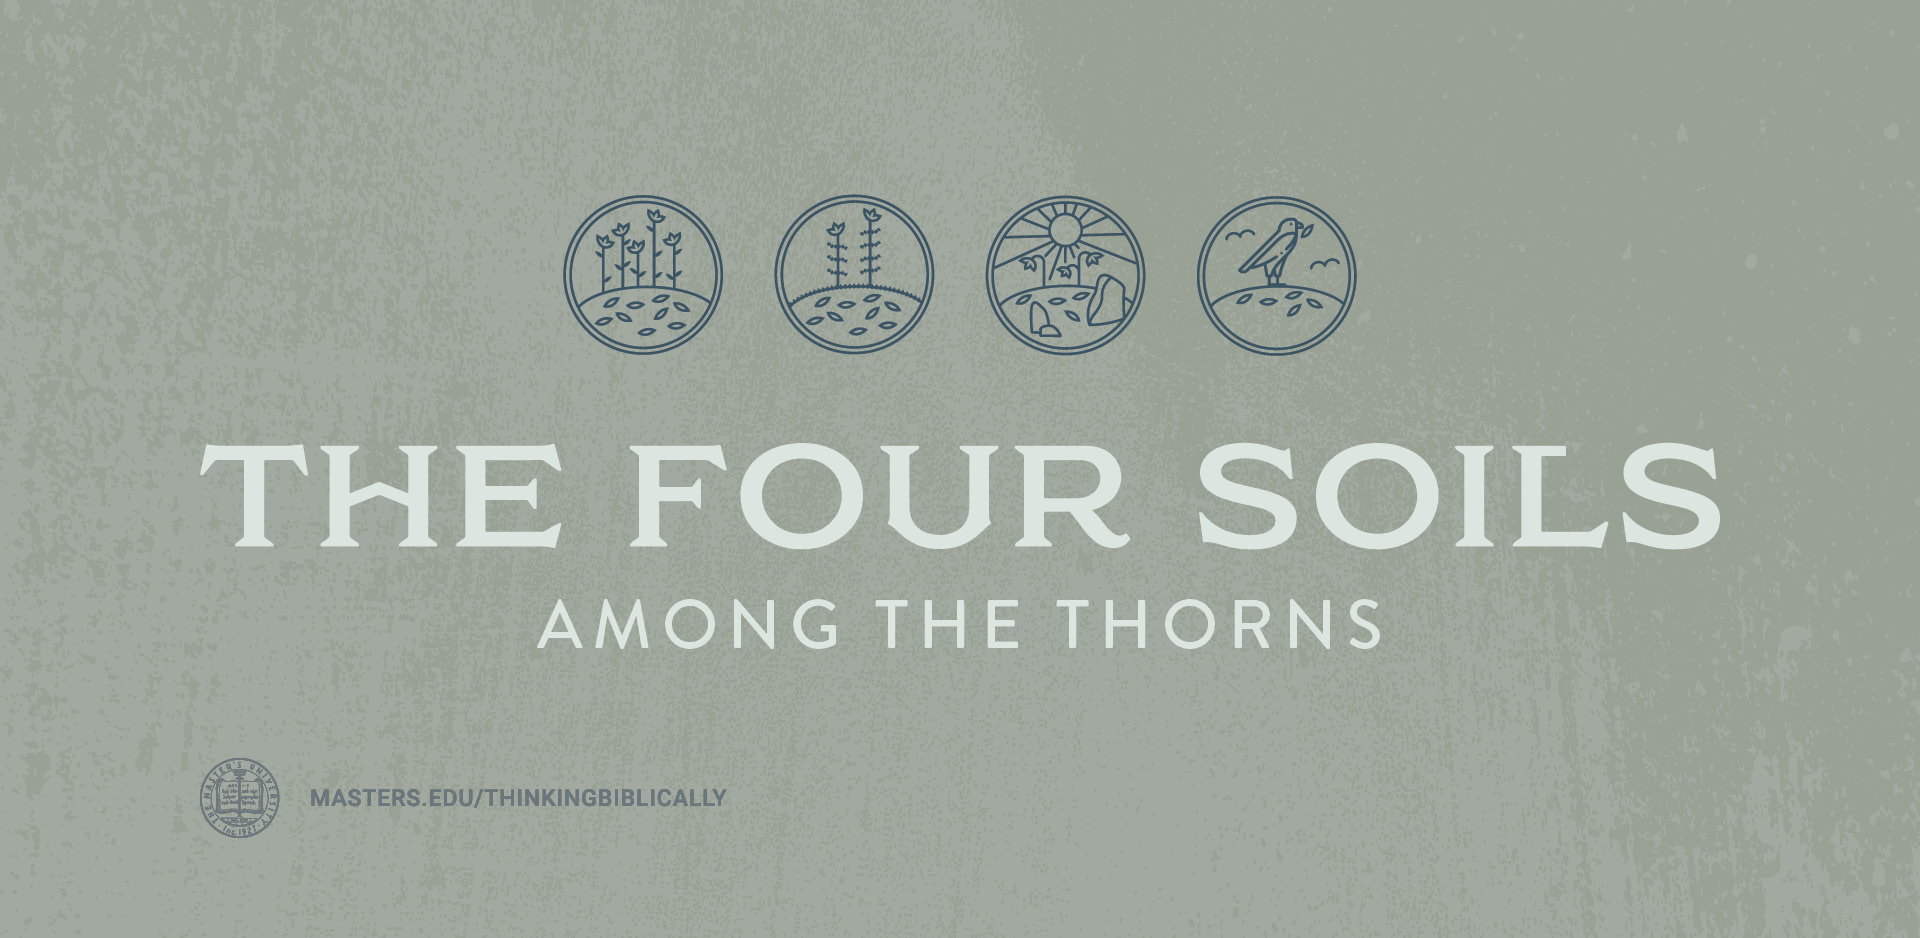 The Four Soils: Among The Thorns Featured Image